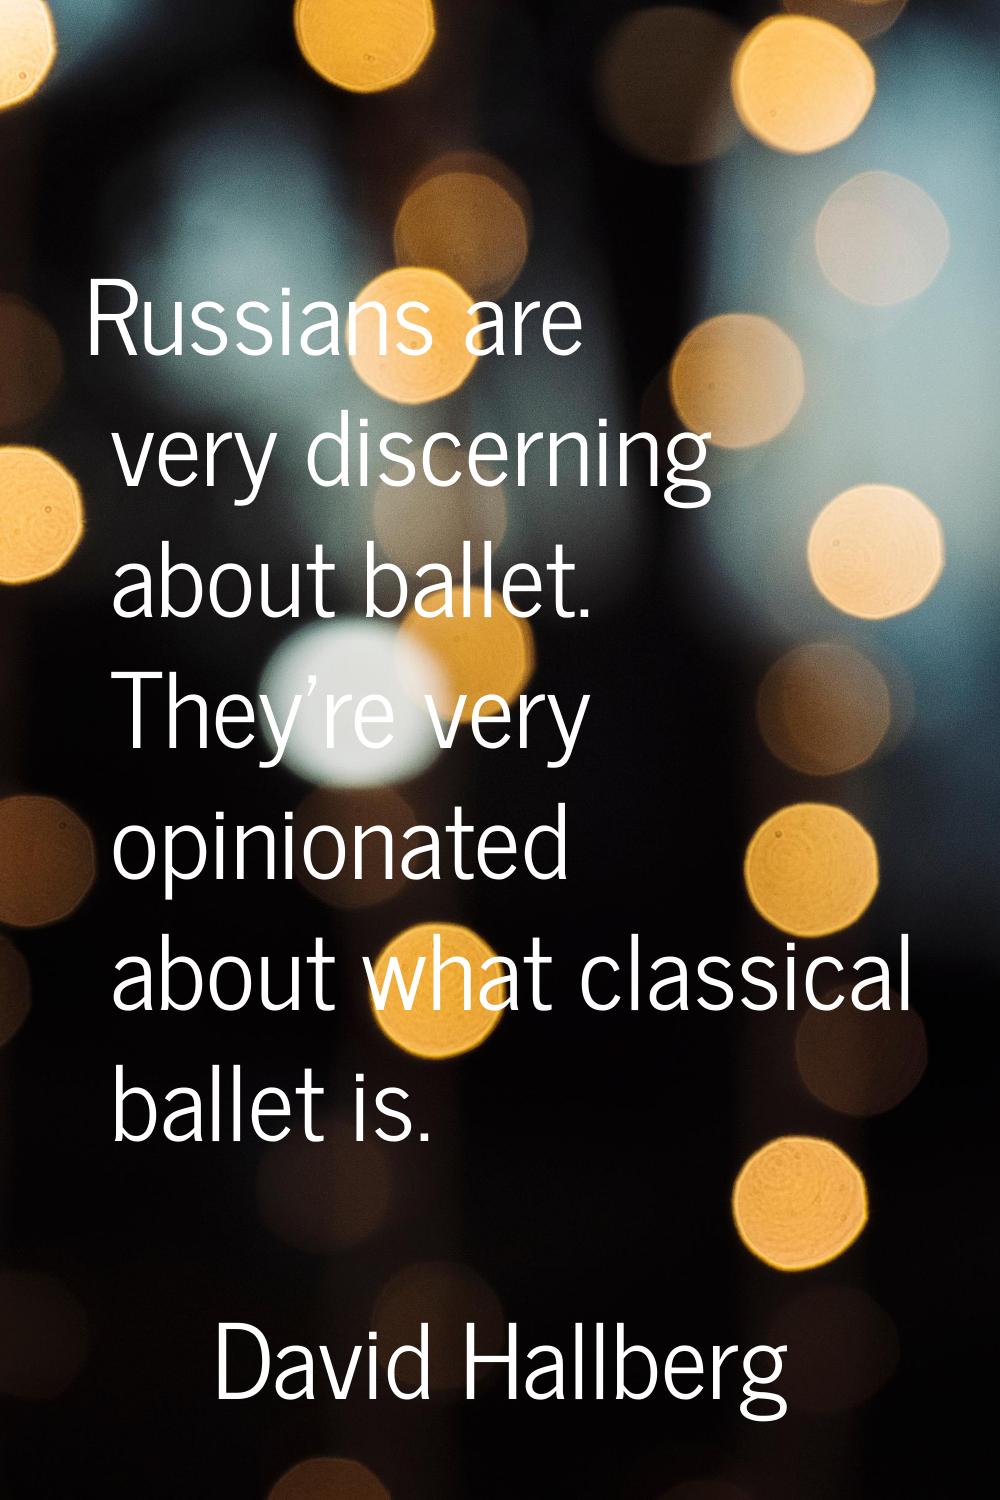 Russians are very discerning about ballet. They're very opinionated about what classical ballet is.